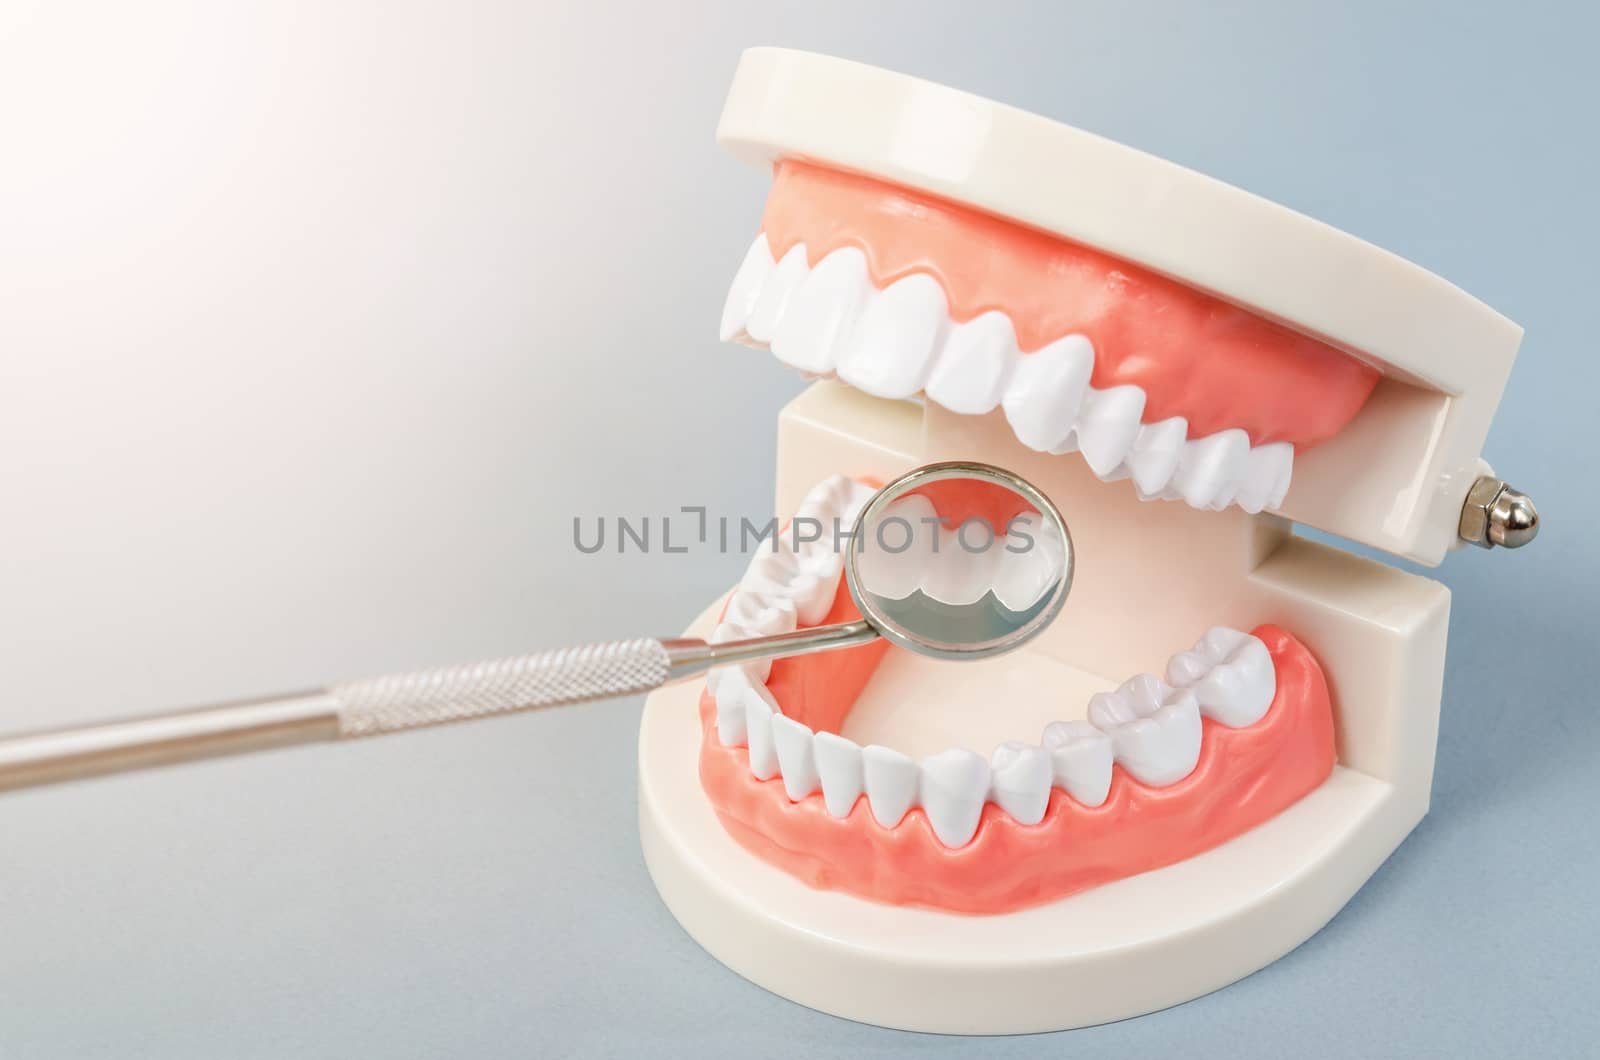 Mirror dentist equipment with model teeth on grey background. Dentist apoointment concept.